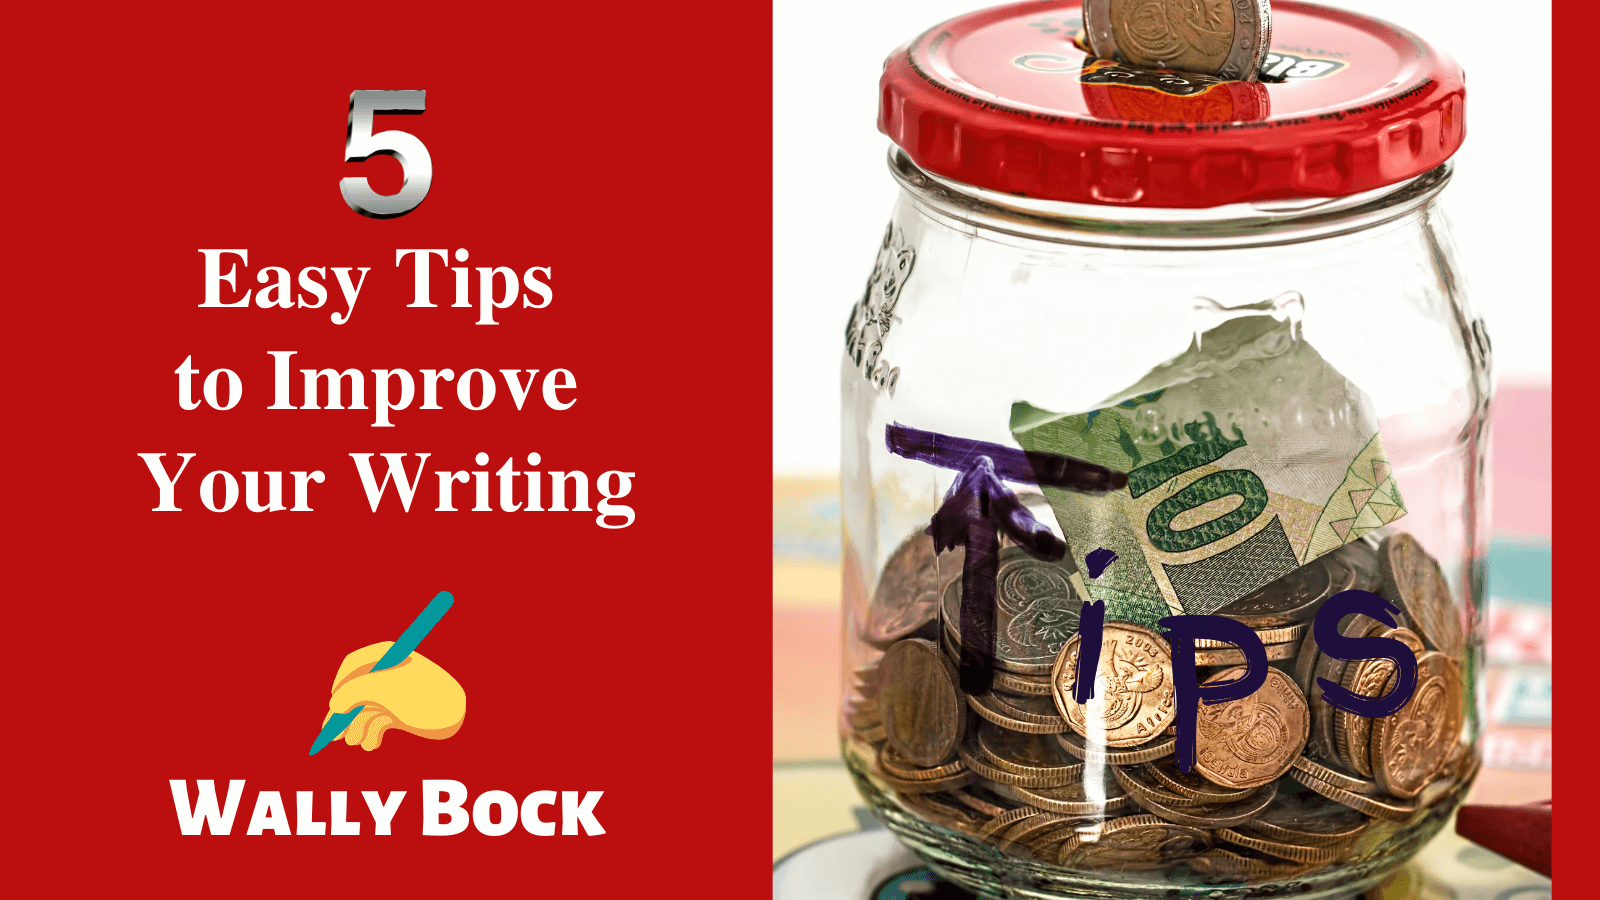 Better Writing: 5 Easy Tips to Improve Your Writing